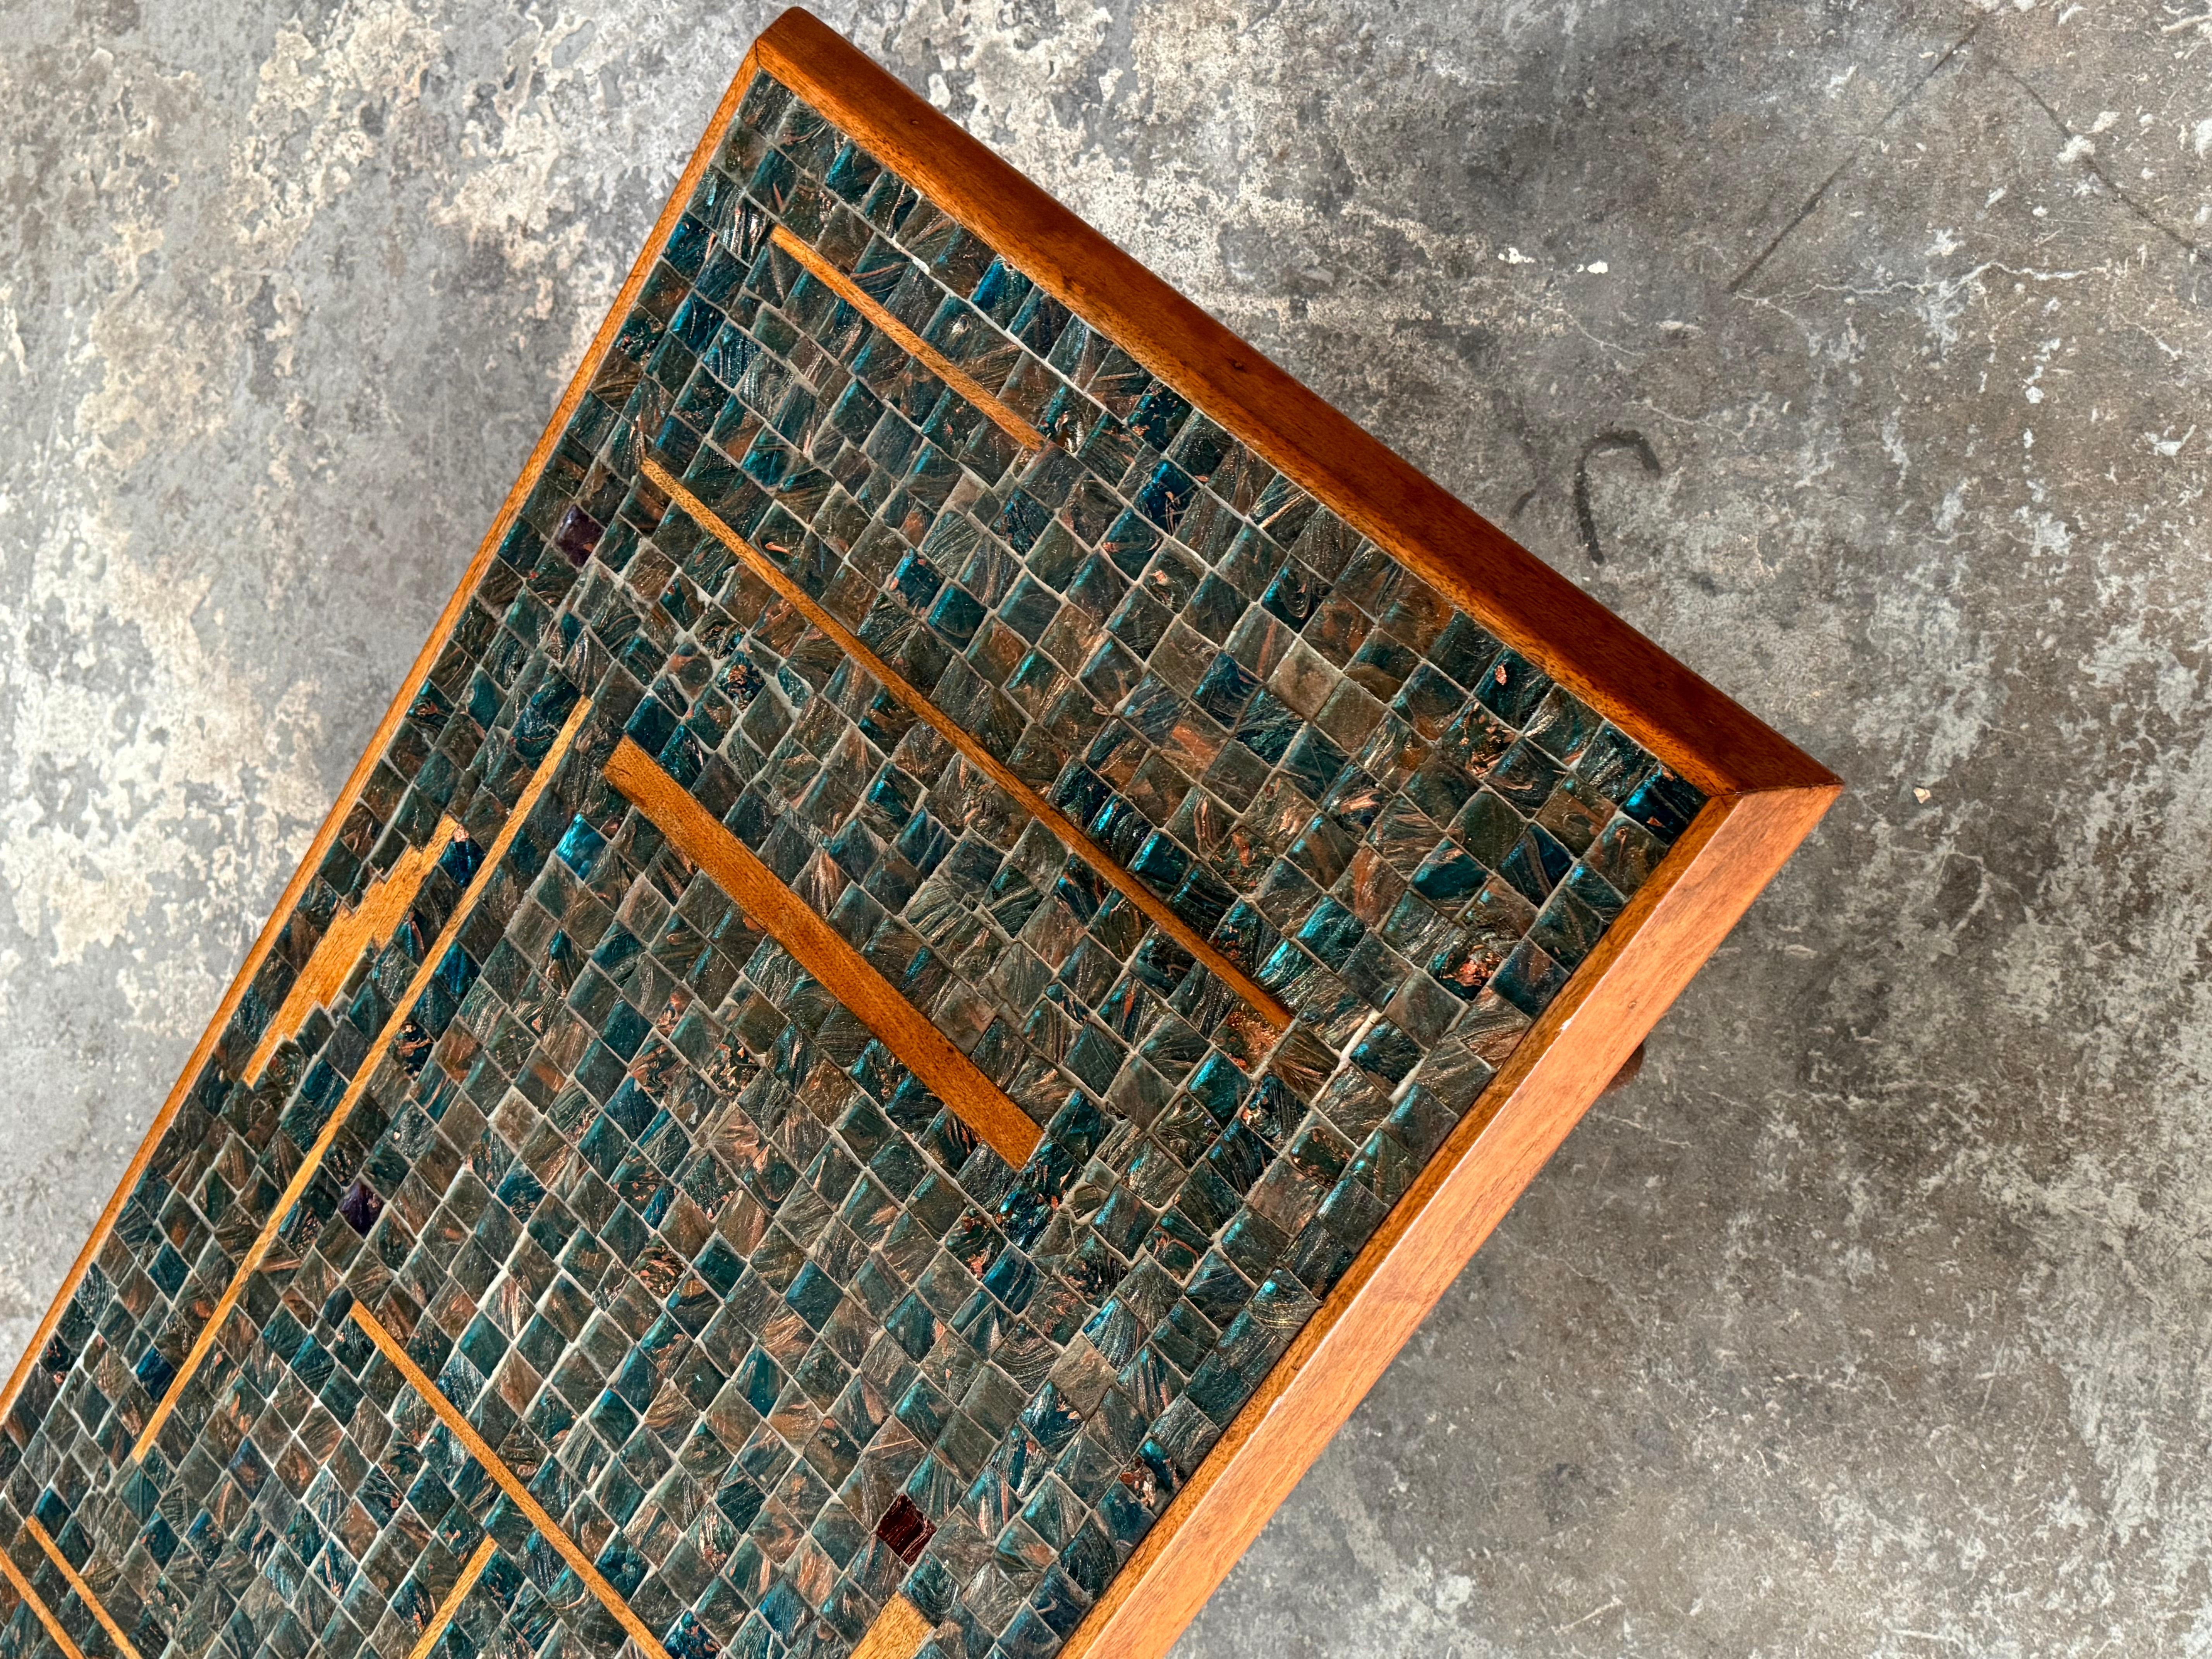 American 1950s Handmade  Glass Tile Mosaic with Walnut Inlay Coffee Table For Sale